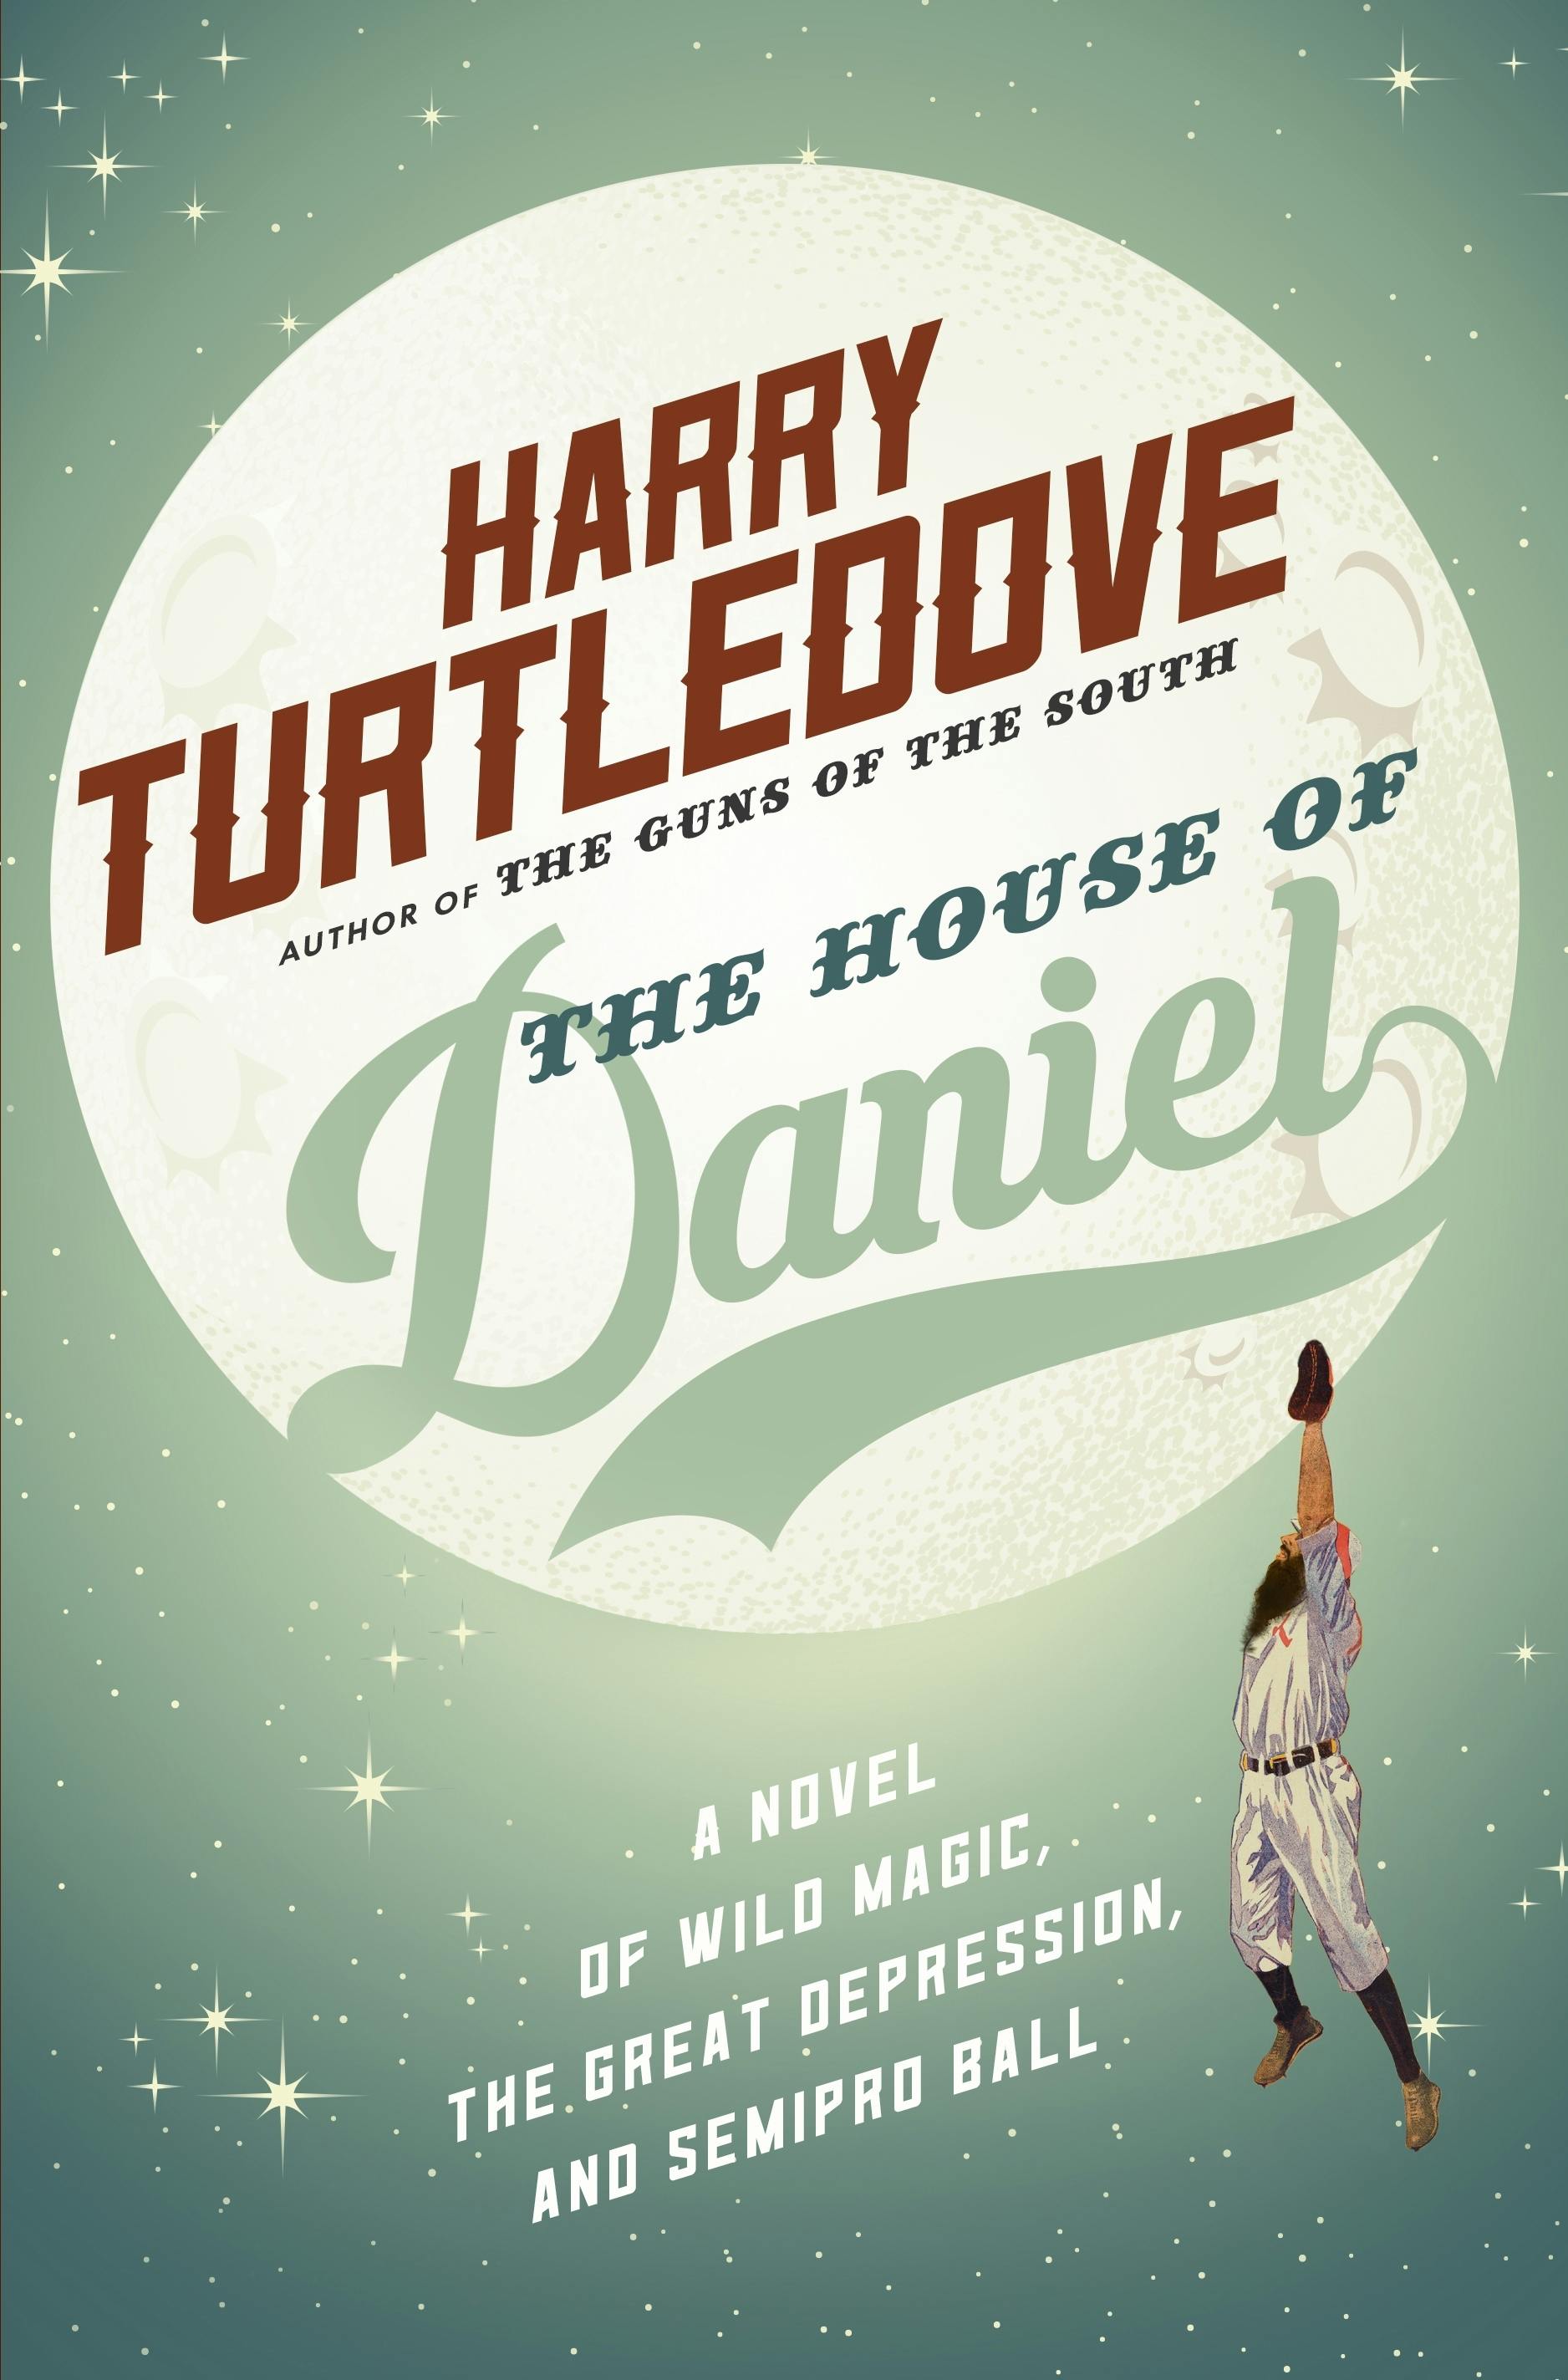 Cover for the book titled as: The House of Daniel